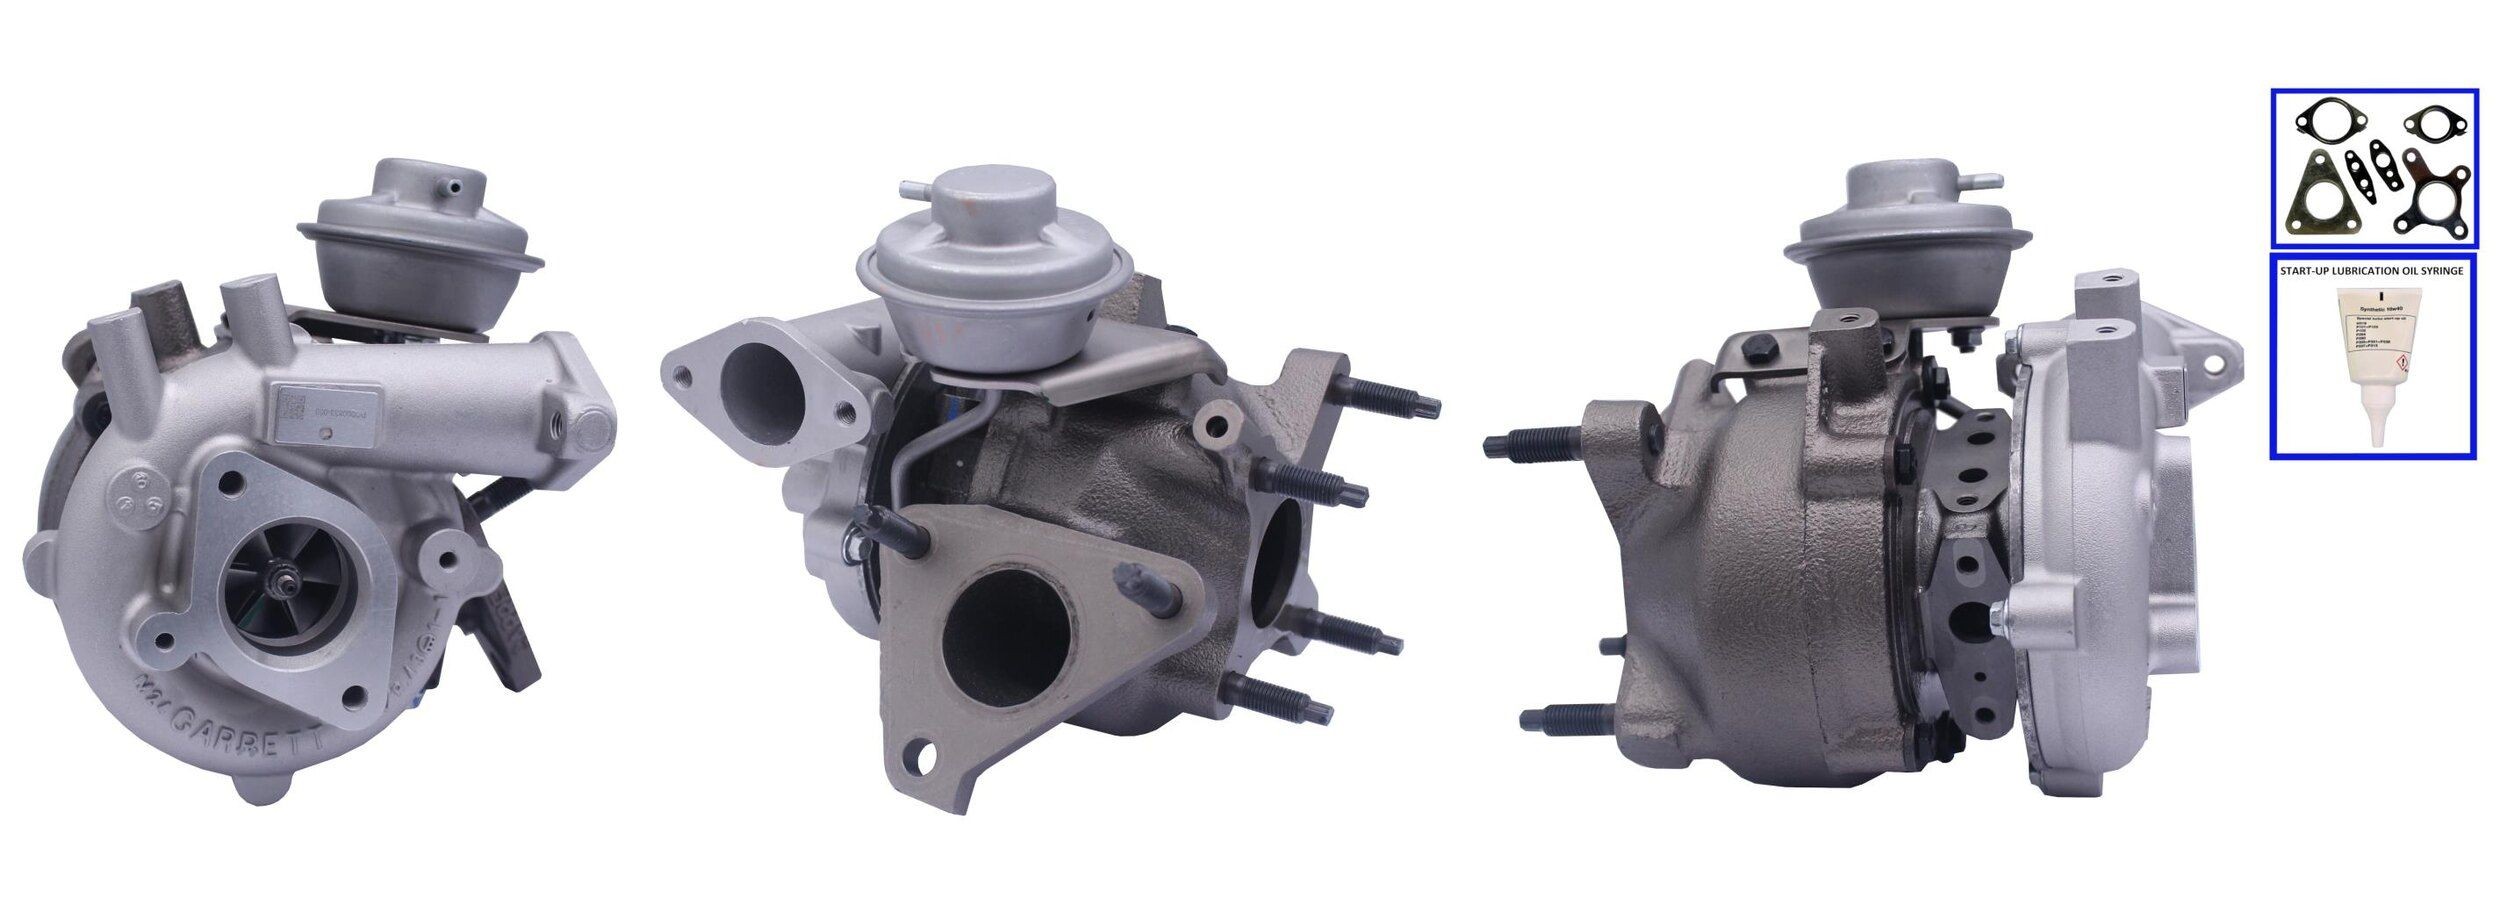 LUCAS LTRPA7504415 Turbocharger Exhaust Turbocharger, Pneumatically controlled actuator, with gaskets/seals